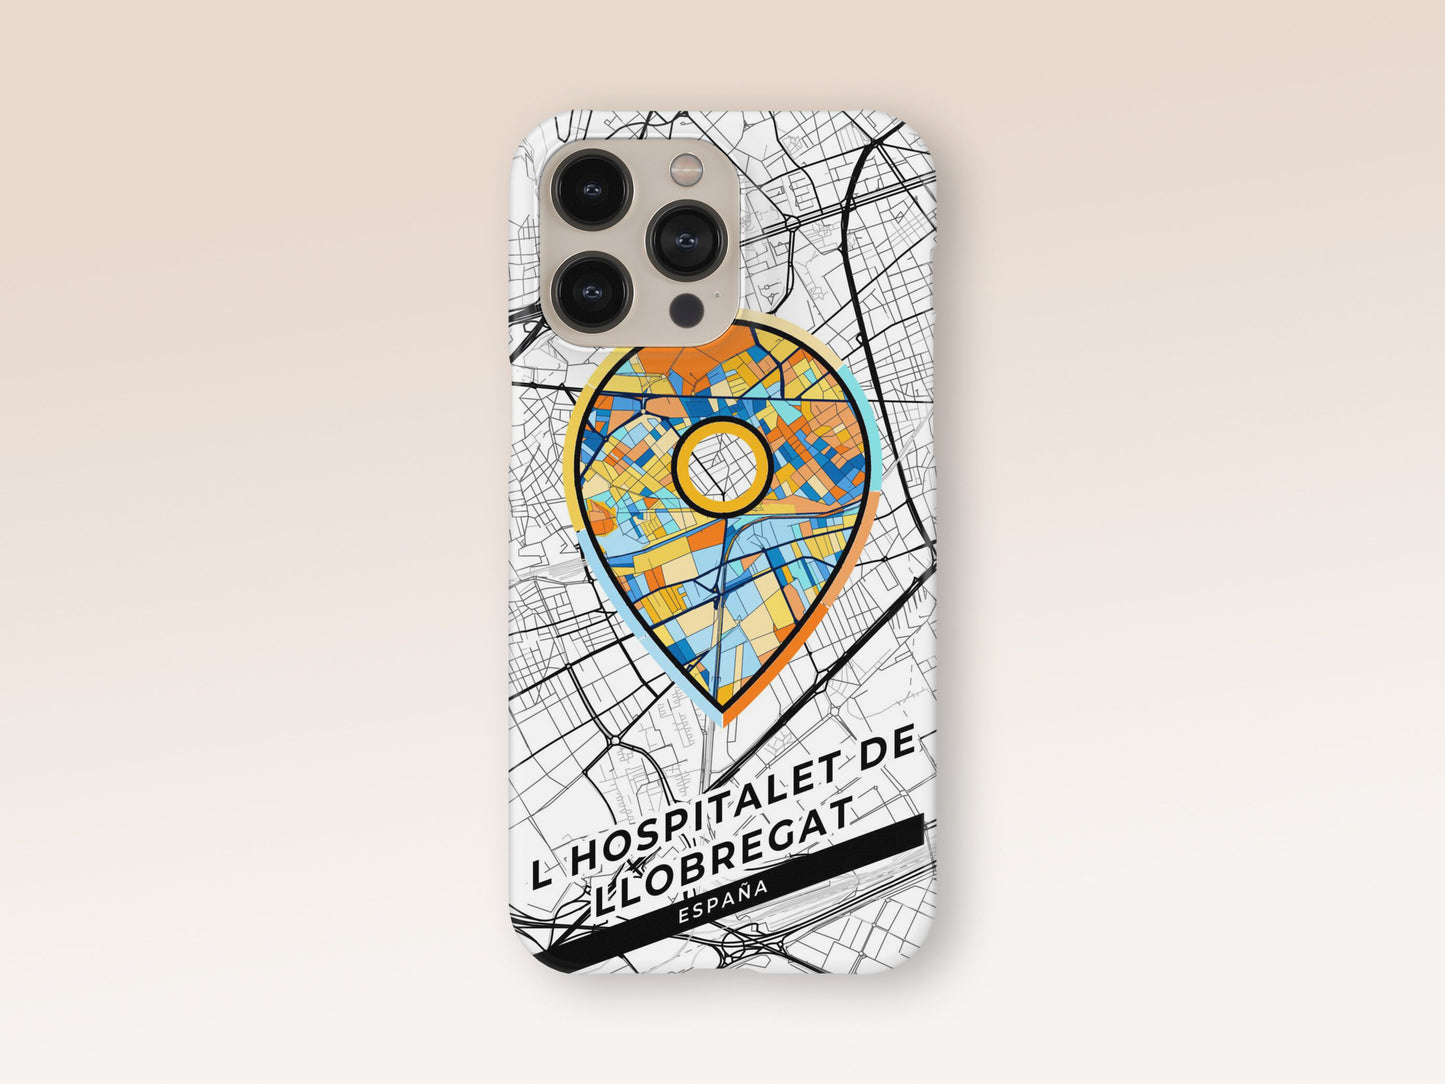 L Hospitalet De Llobregat Spain slim phone case with colorful icon. Birthday, wedding or housewarming gift. Couple match cases. 1